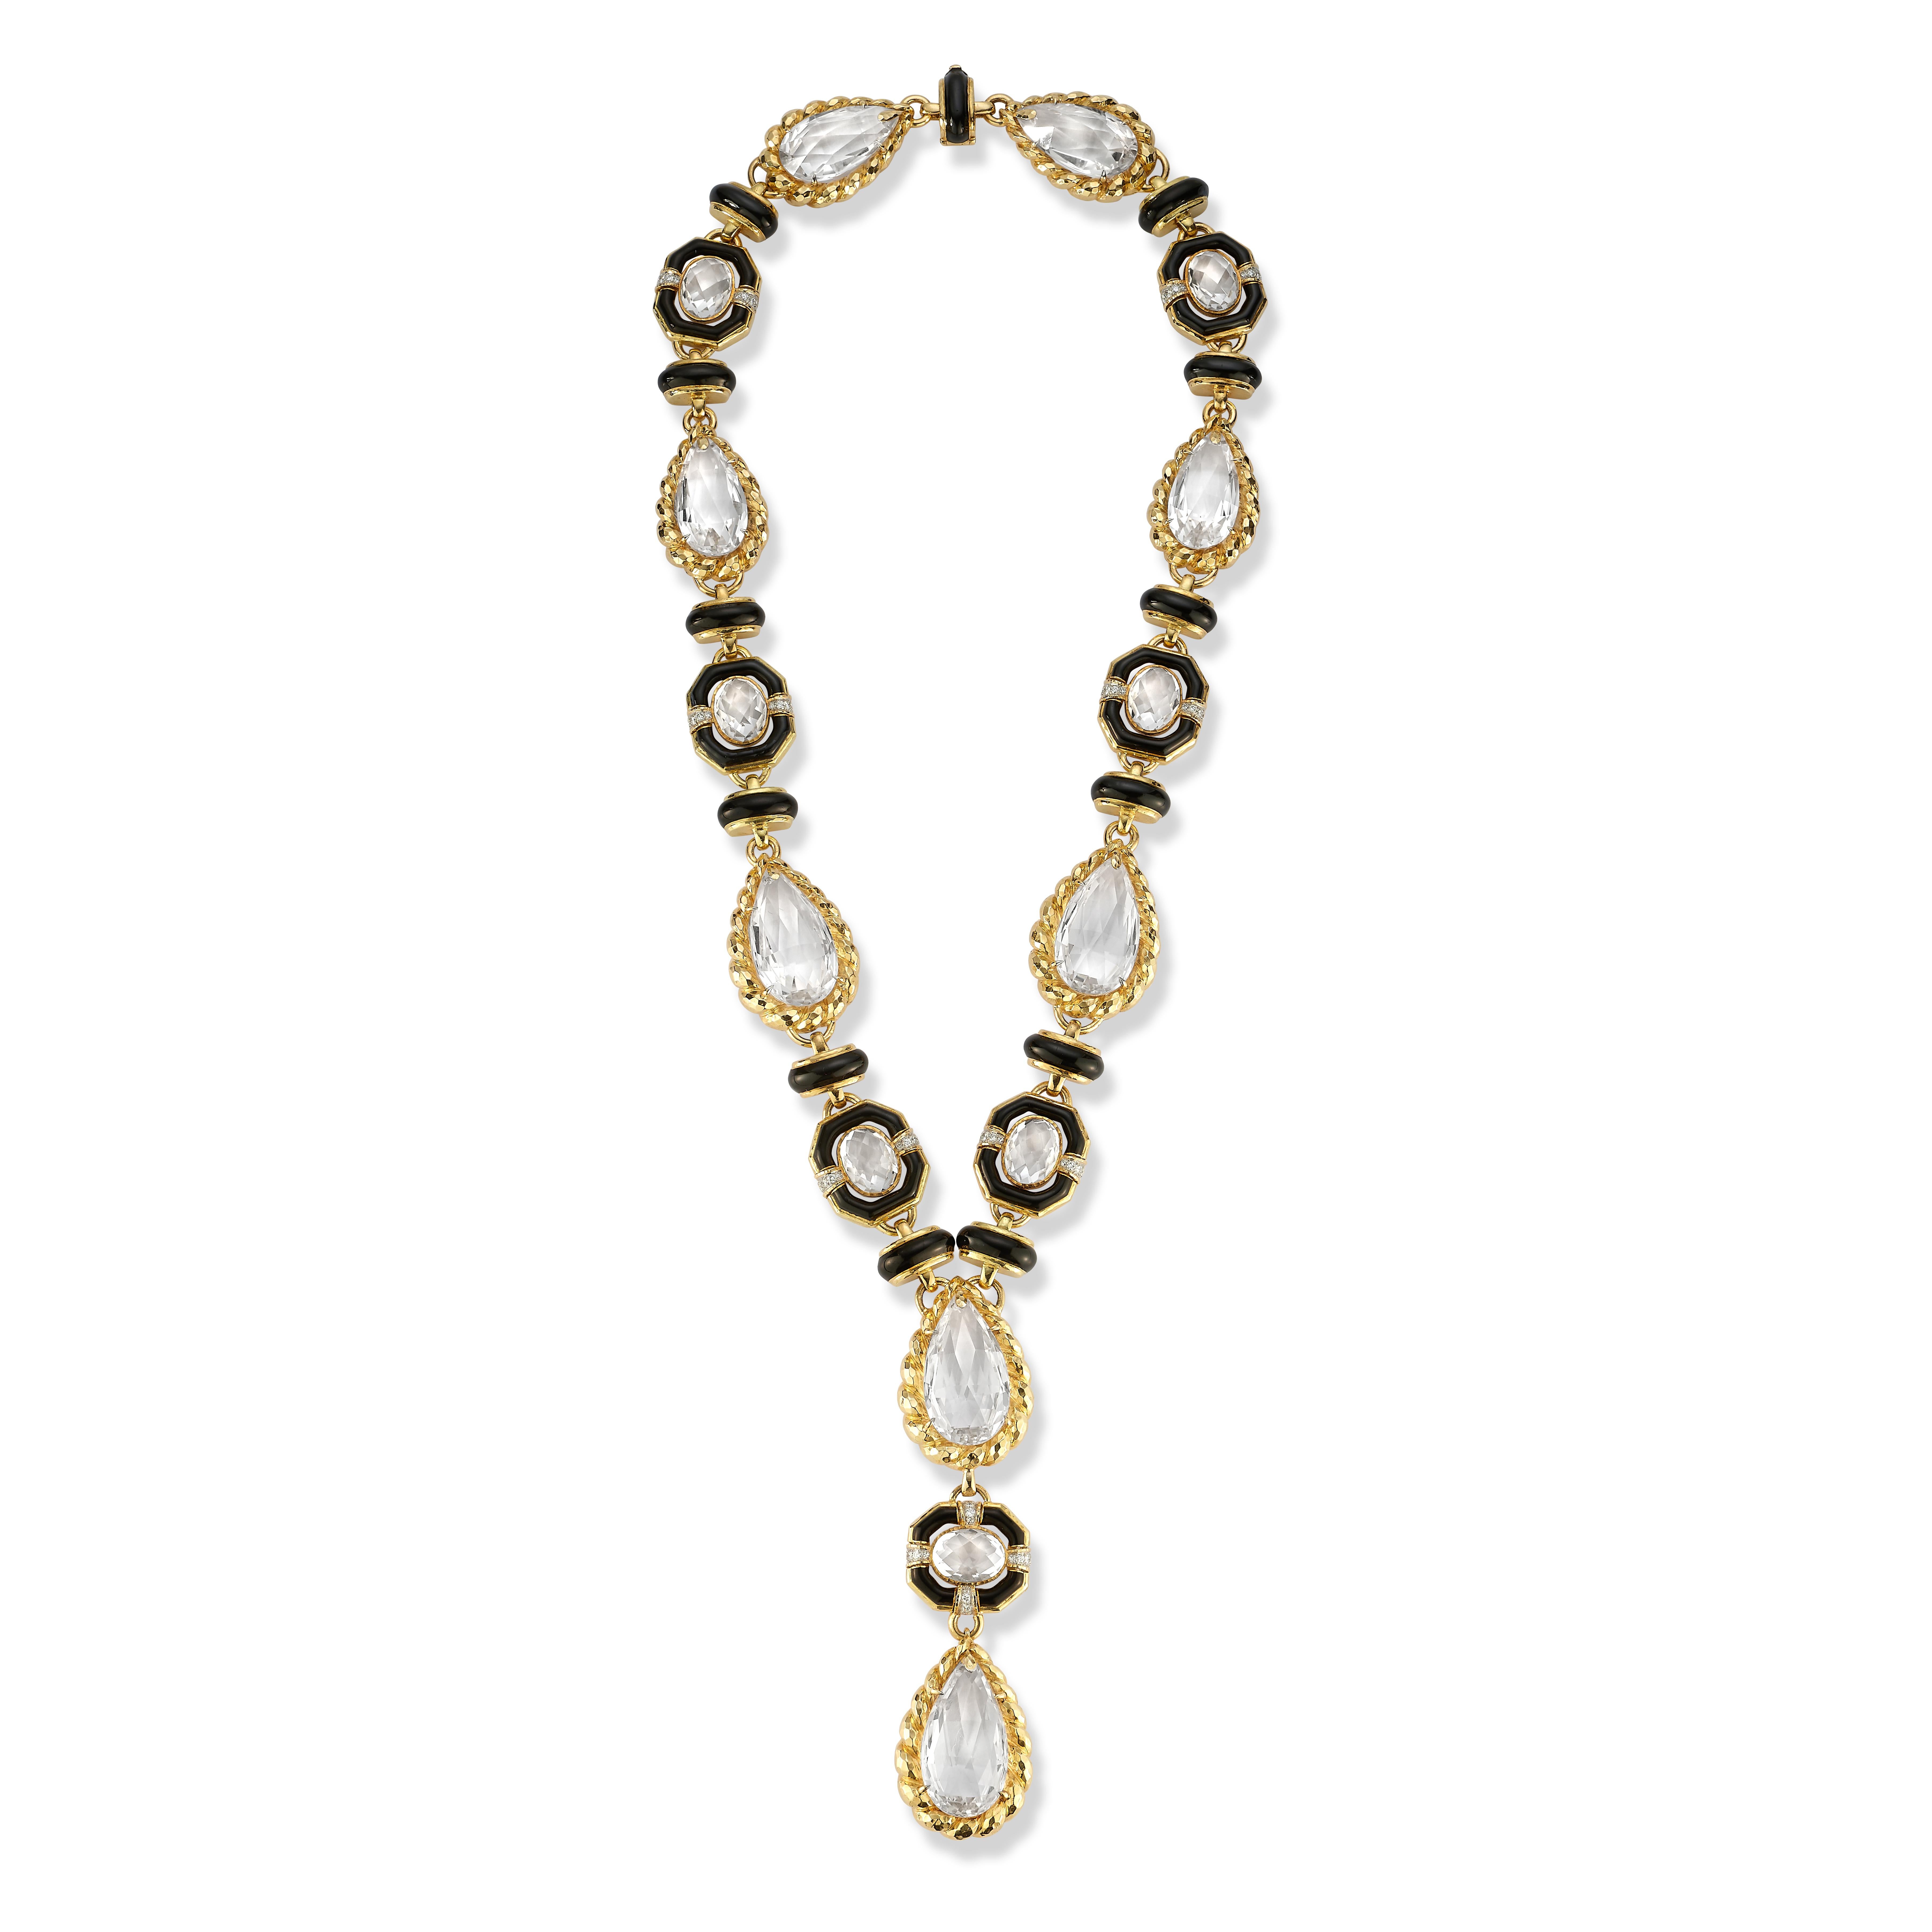 David Webb Rock Crystal Necklace, A large necklace consisting of black enamel links attaching to pear and oval cut rock crystals, and 64 round cut diamonds set in hammered gold. 

Diamond Weight: approximately 3.20 carats 

Measurements: necklace,